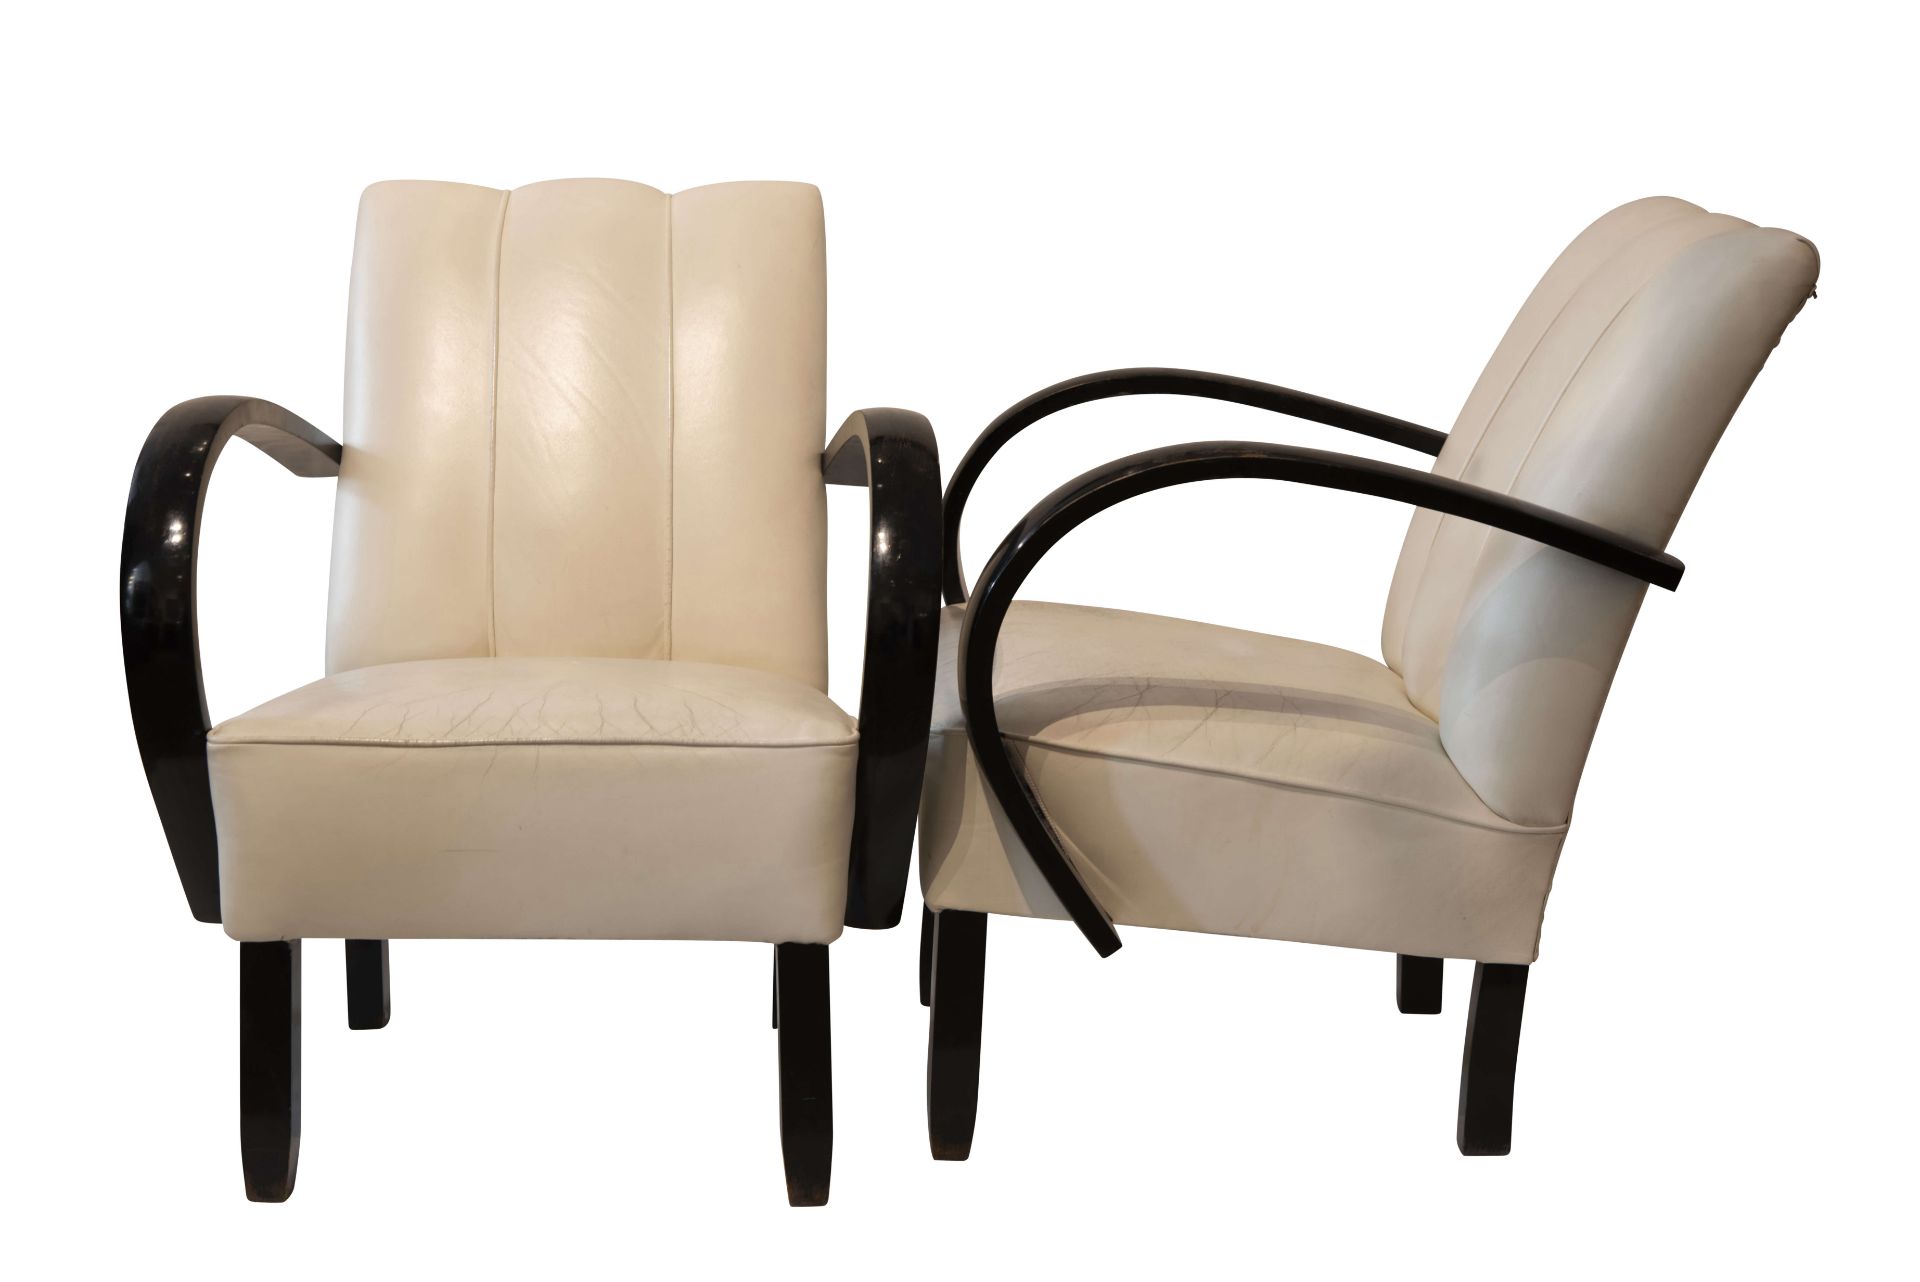 Paar Art Deco Armlehnstuhl | Pair of Leather Armchairs after a Design by Josef Hoffmann - Image 3 of 5